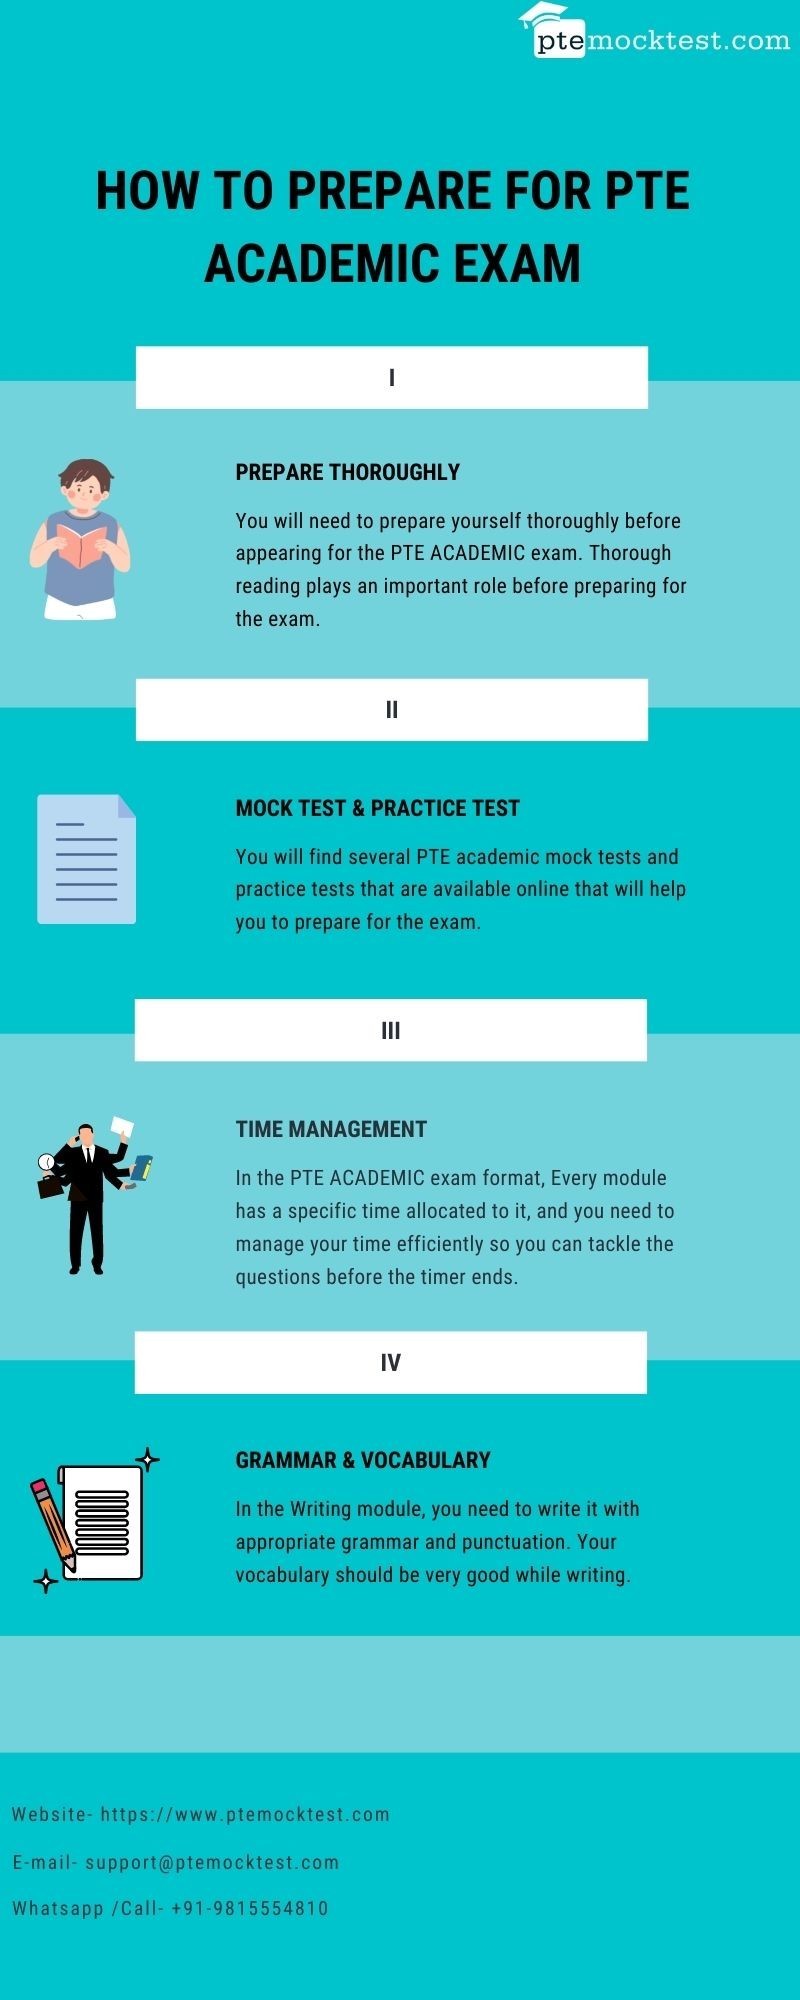 How To Prepare For PTE Exam?